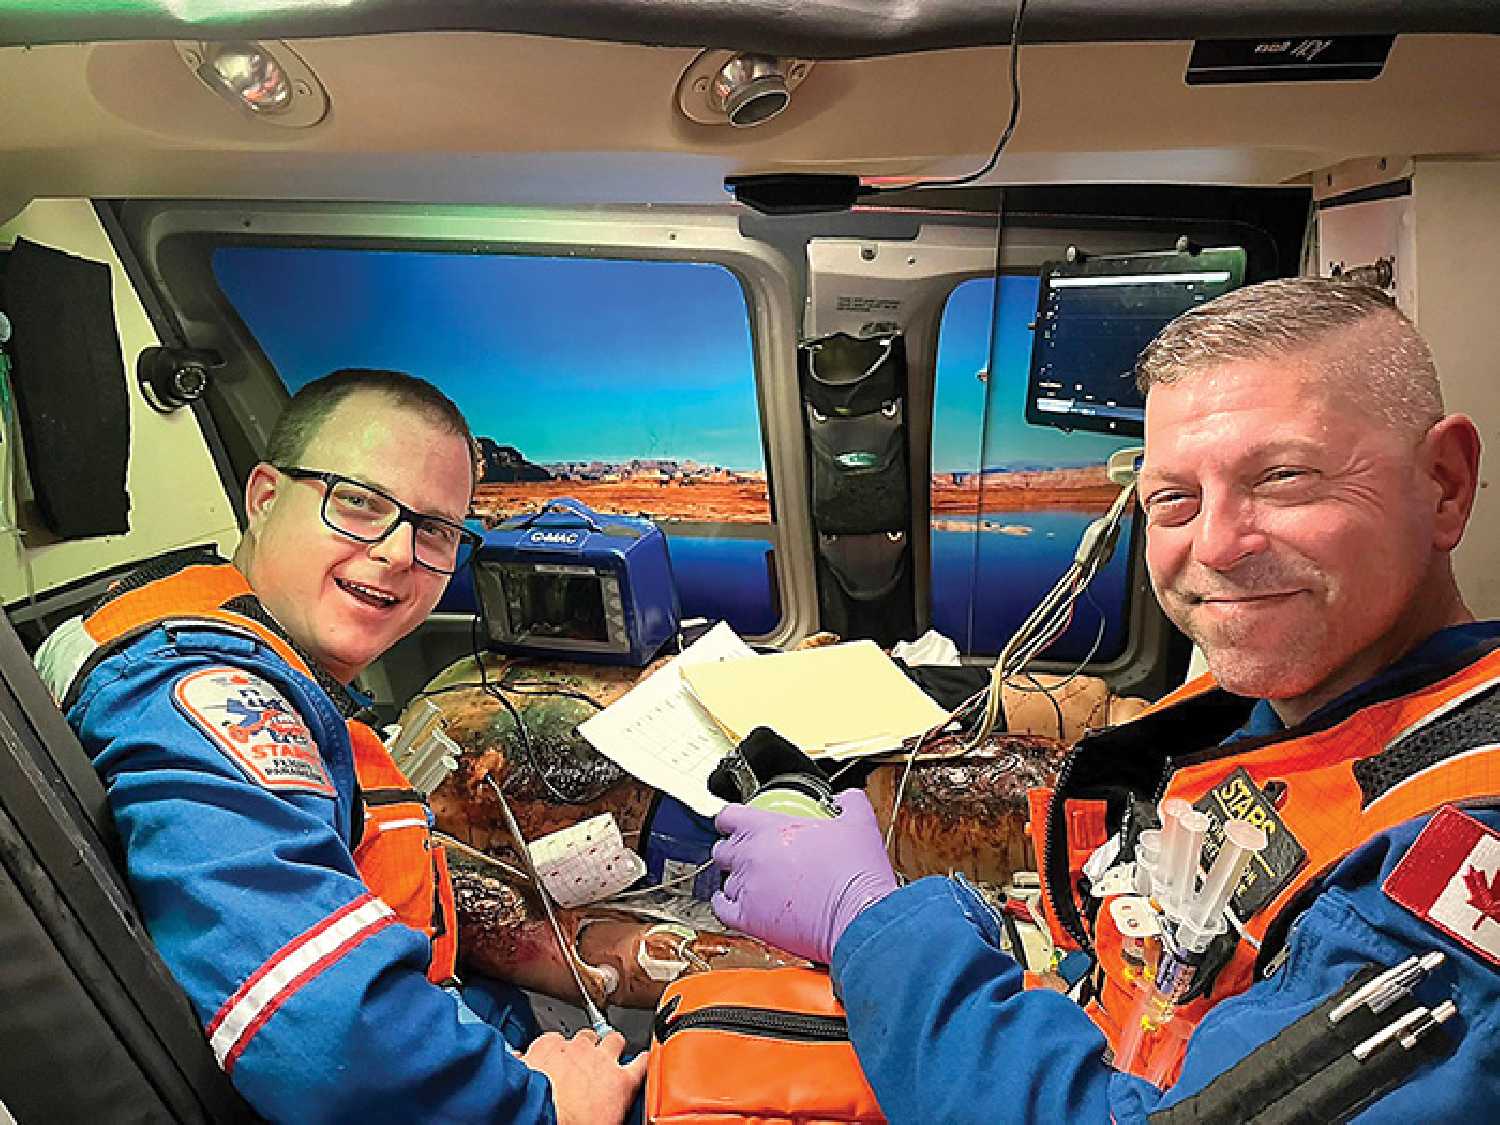 Left are, paramedic Chris Fay of STARS Air Ambulance and Kevin Easton nurse of STARS Air Ambulance on scene at the Air Medical Transport Simulation Competition in Tampa, Florida on Oct. 24 to 26.